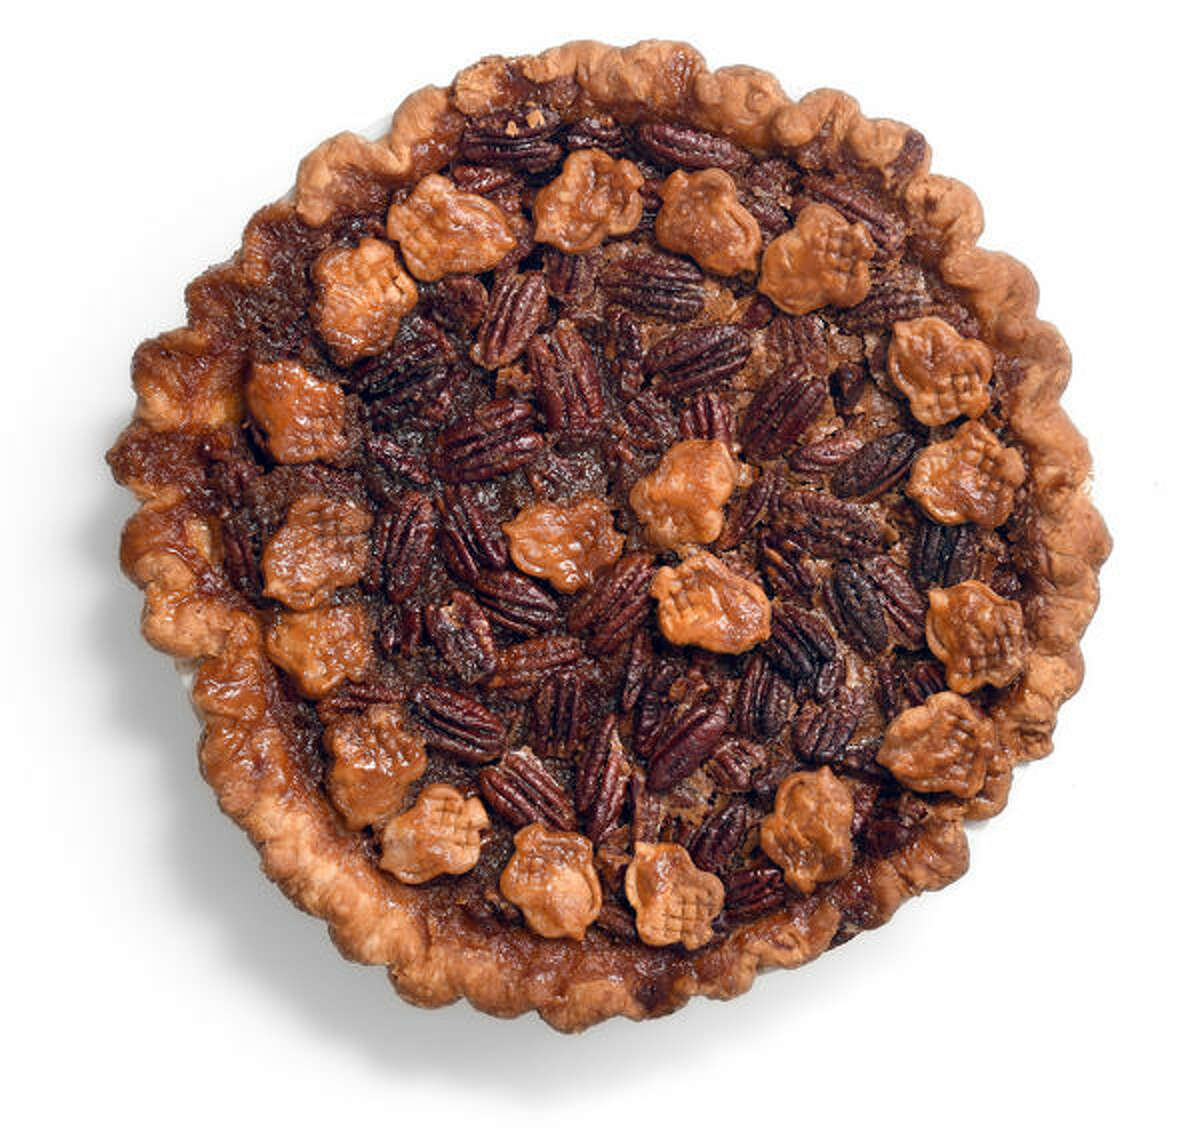  Pecan bourbon sweet potato pie from Mothership Bakery and Cafe in Danbury